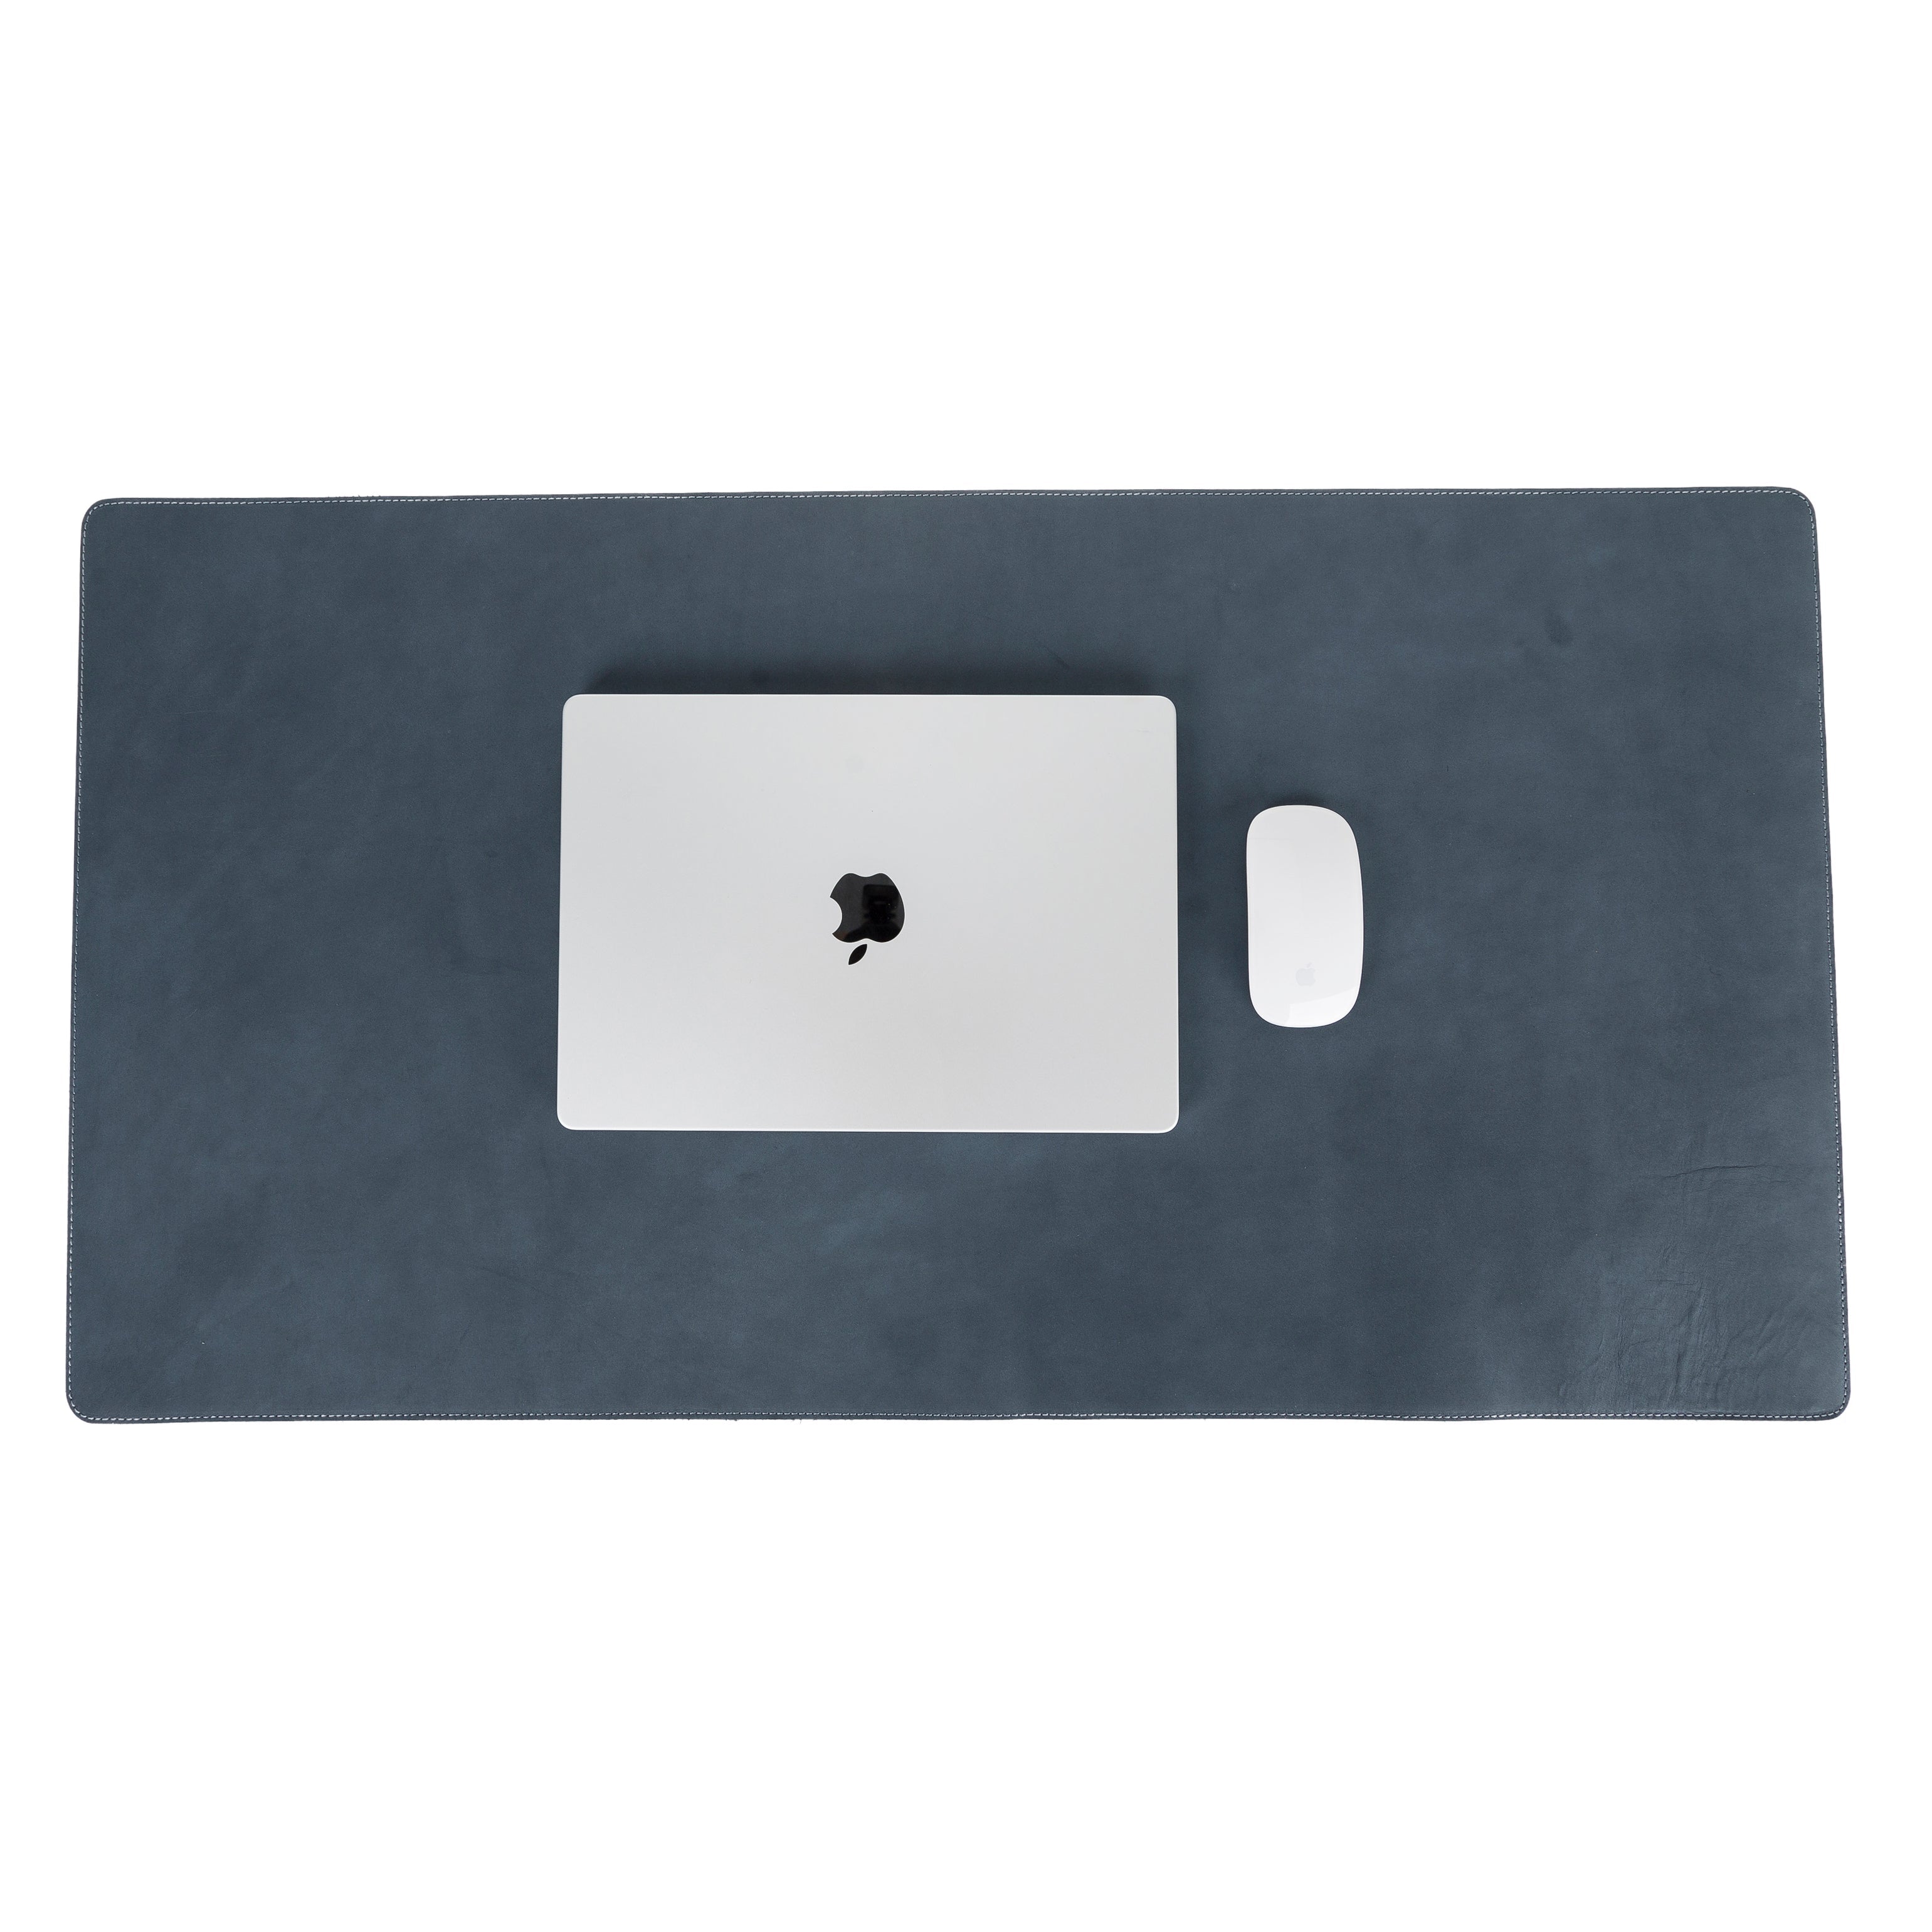 LupinnyLeather Genuine Blue Leather Deskmat, Computer Pad, Office Desk Pad 5